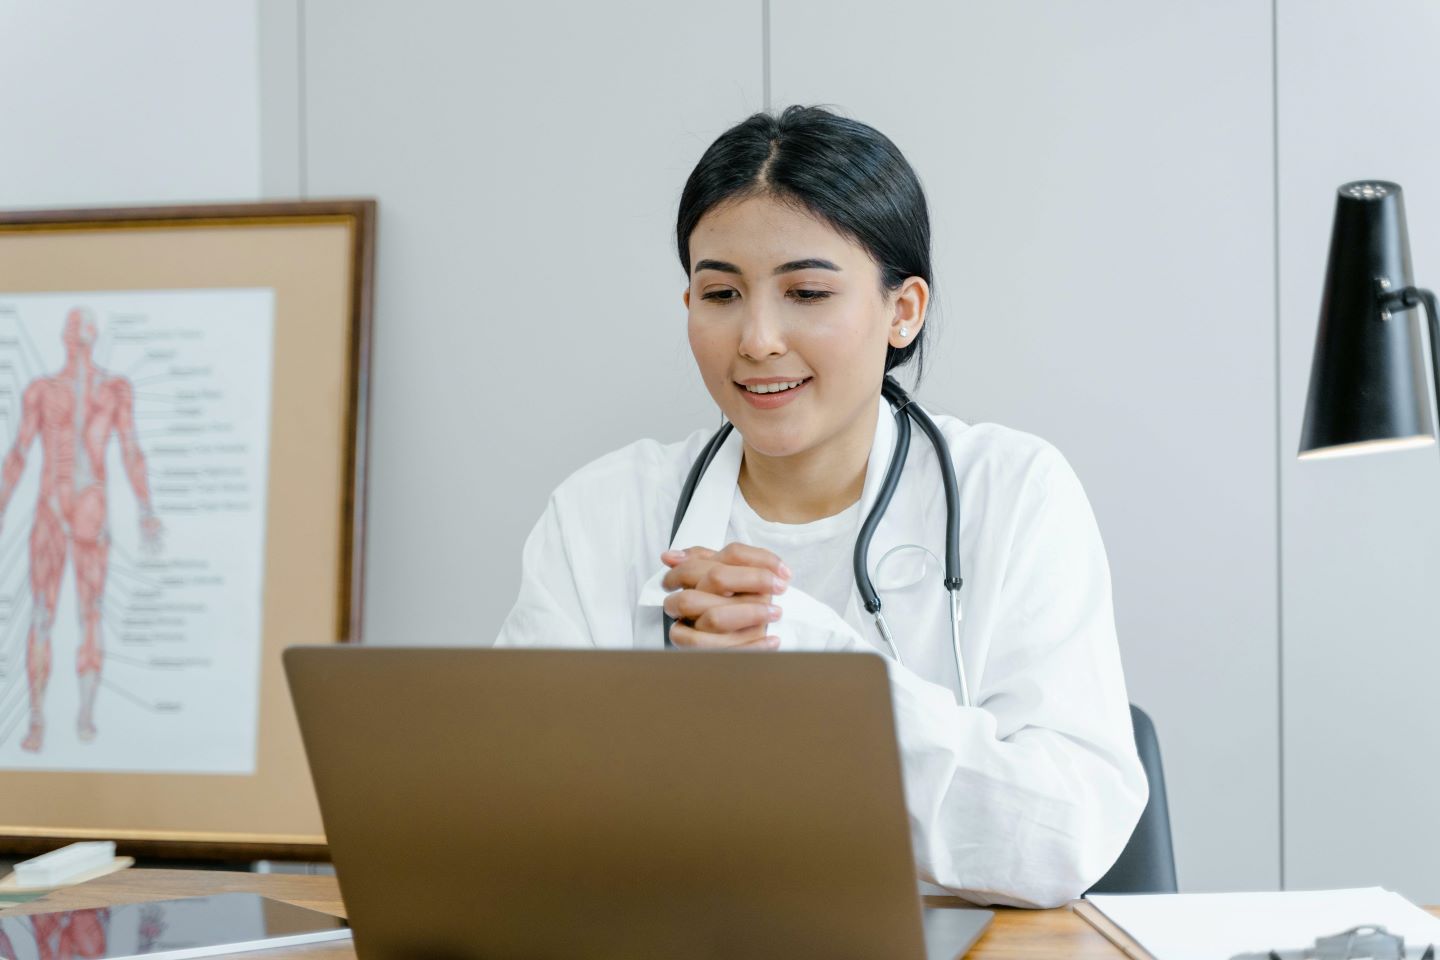 A woman who appears to be a doctor or healthcare professional. She is wearing a white coat and a stethoscope around her neck. She is smiling and seems to be engaged in a conversation, likely through a video call on a laptop in front of her.